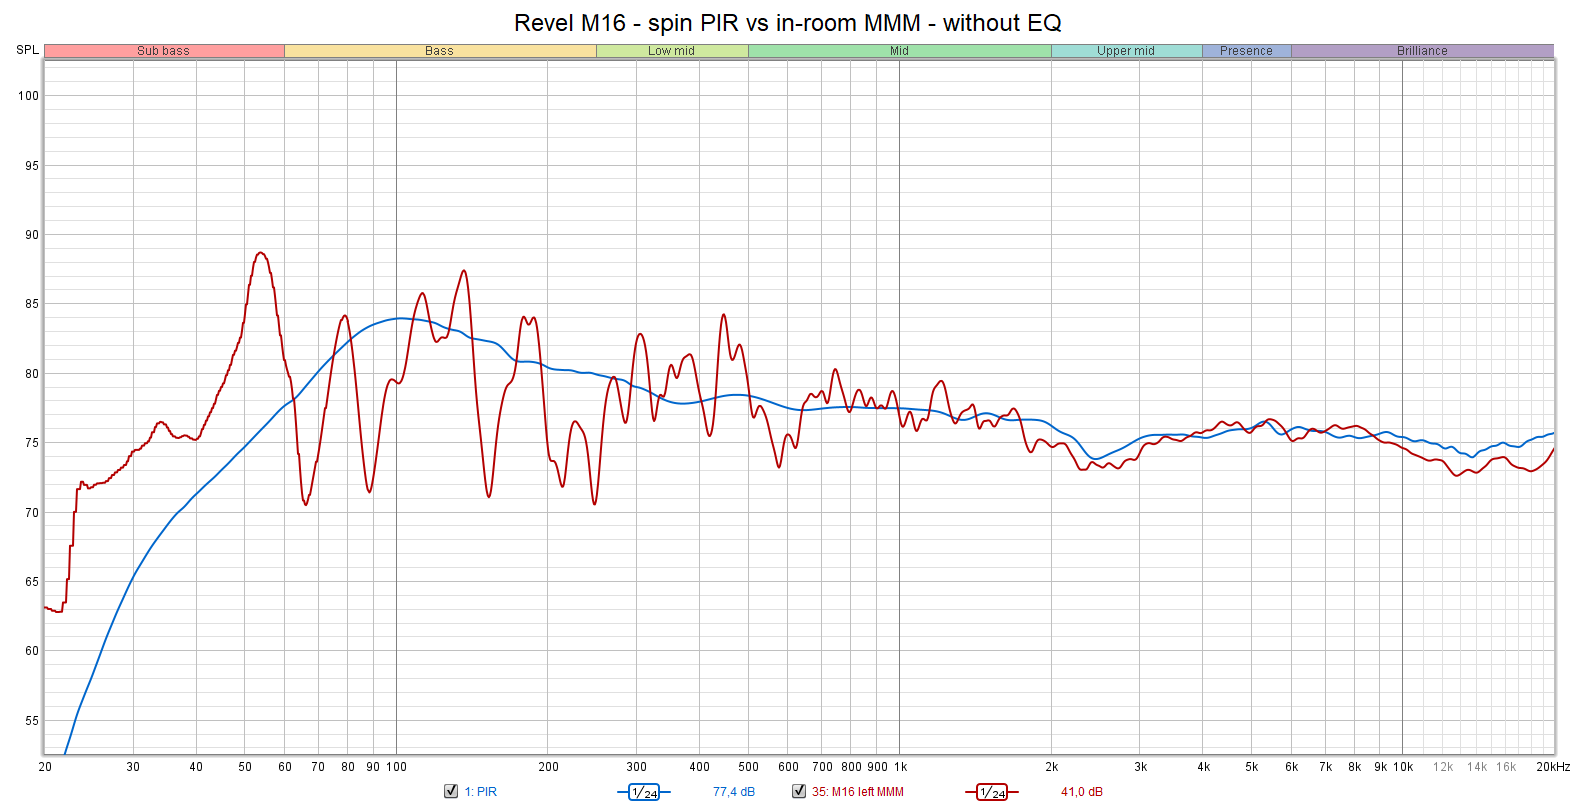 Revel M16 - spin PIR vs in-room MMM - without EQ.png